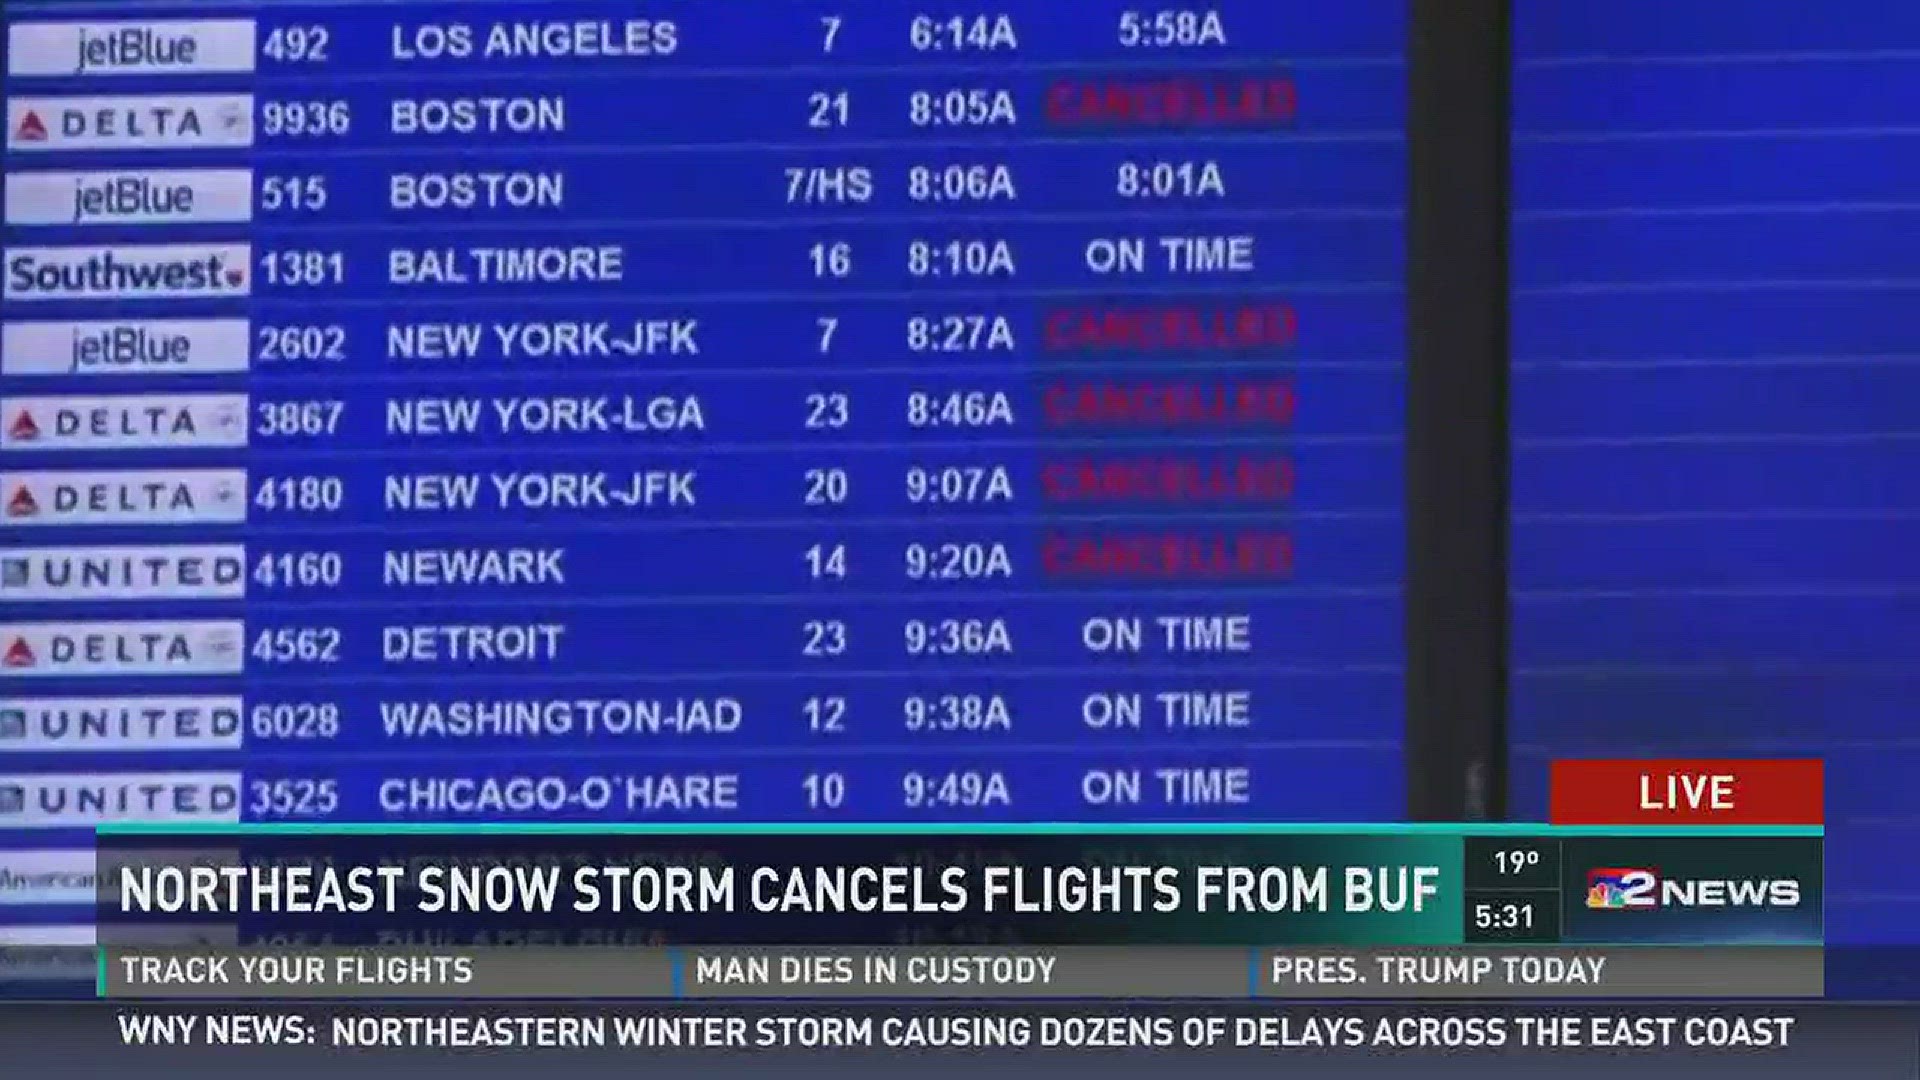 Daybreak has live team coverage on the Northeastern Storm affecting flights out of Buffalo